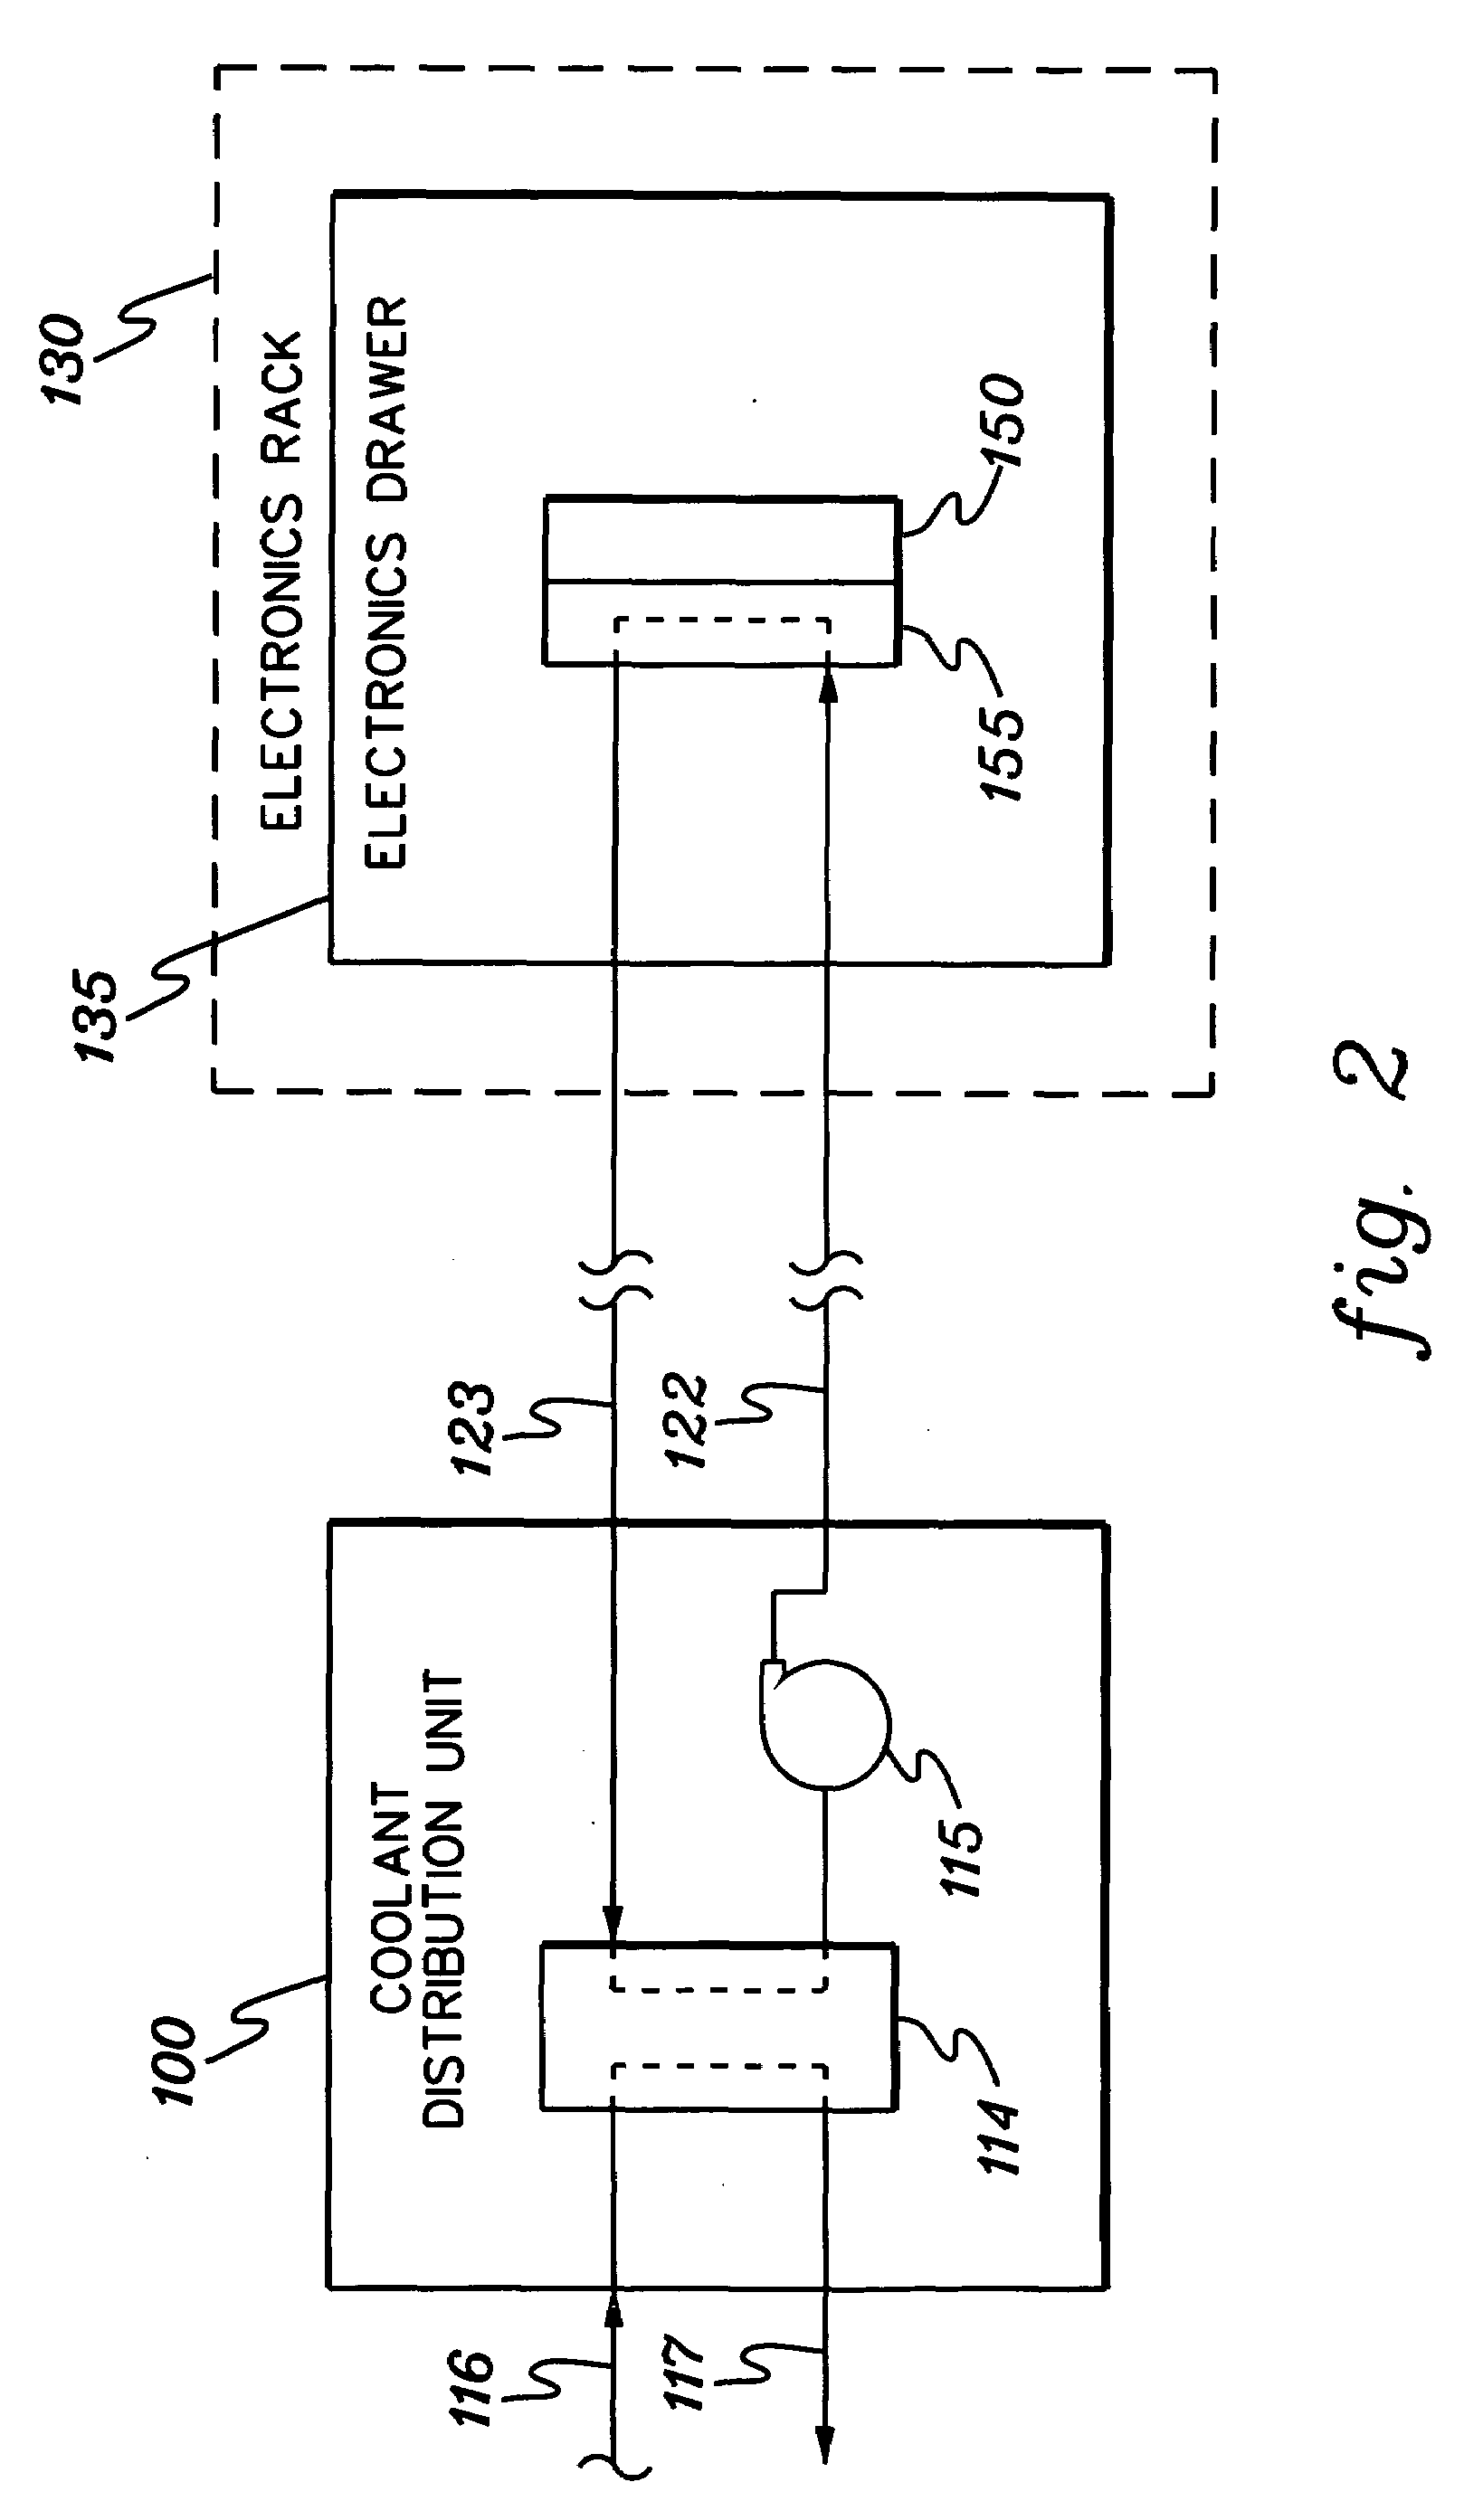 Cooling apparatus for an electronics subsystem employing a coolant flow drive apparatus between coolant flow paths